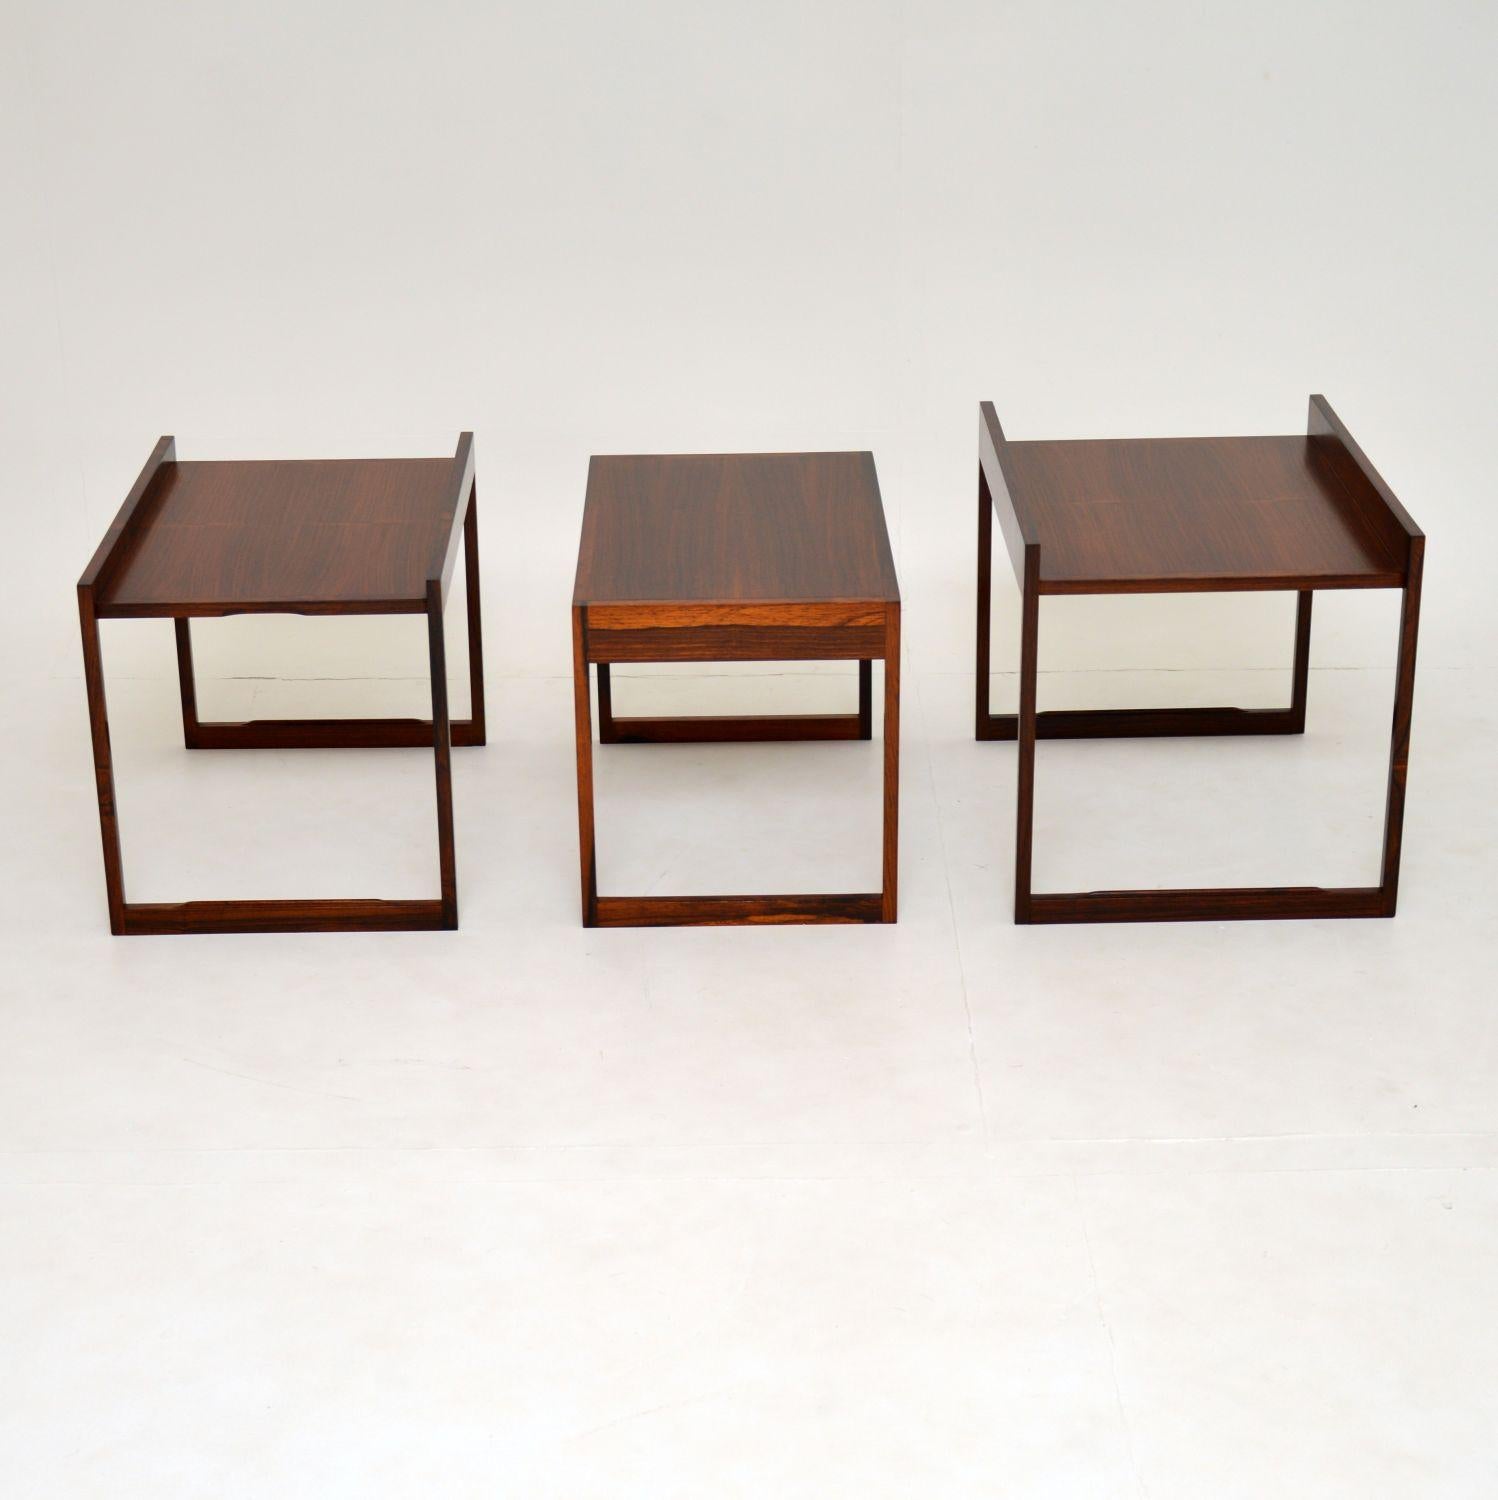 A very rare and unusual vintage Danish nest of tables. These were made in Denmark and date from the 1960s. They were most likely designed by Illum Wikkelso, they have an amazing design and are of superb quality.

The tables stack on top of each